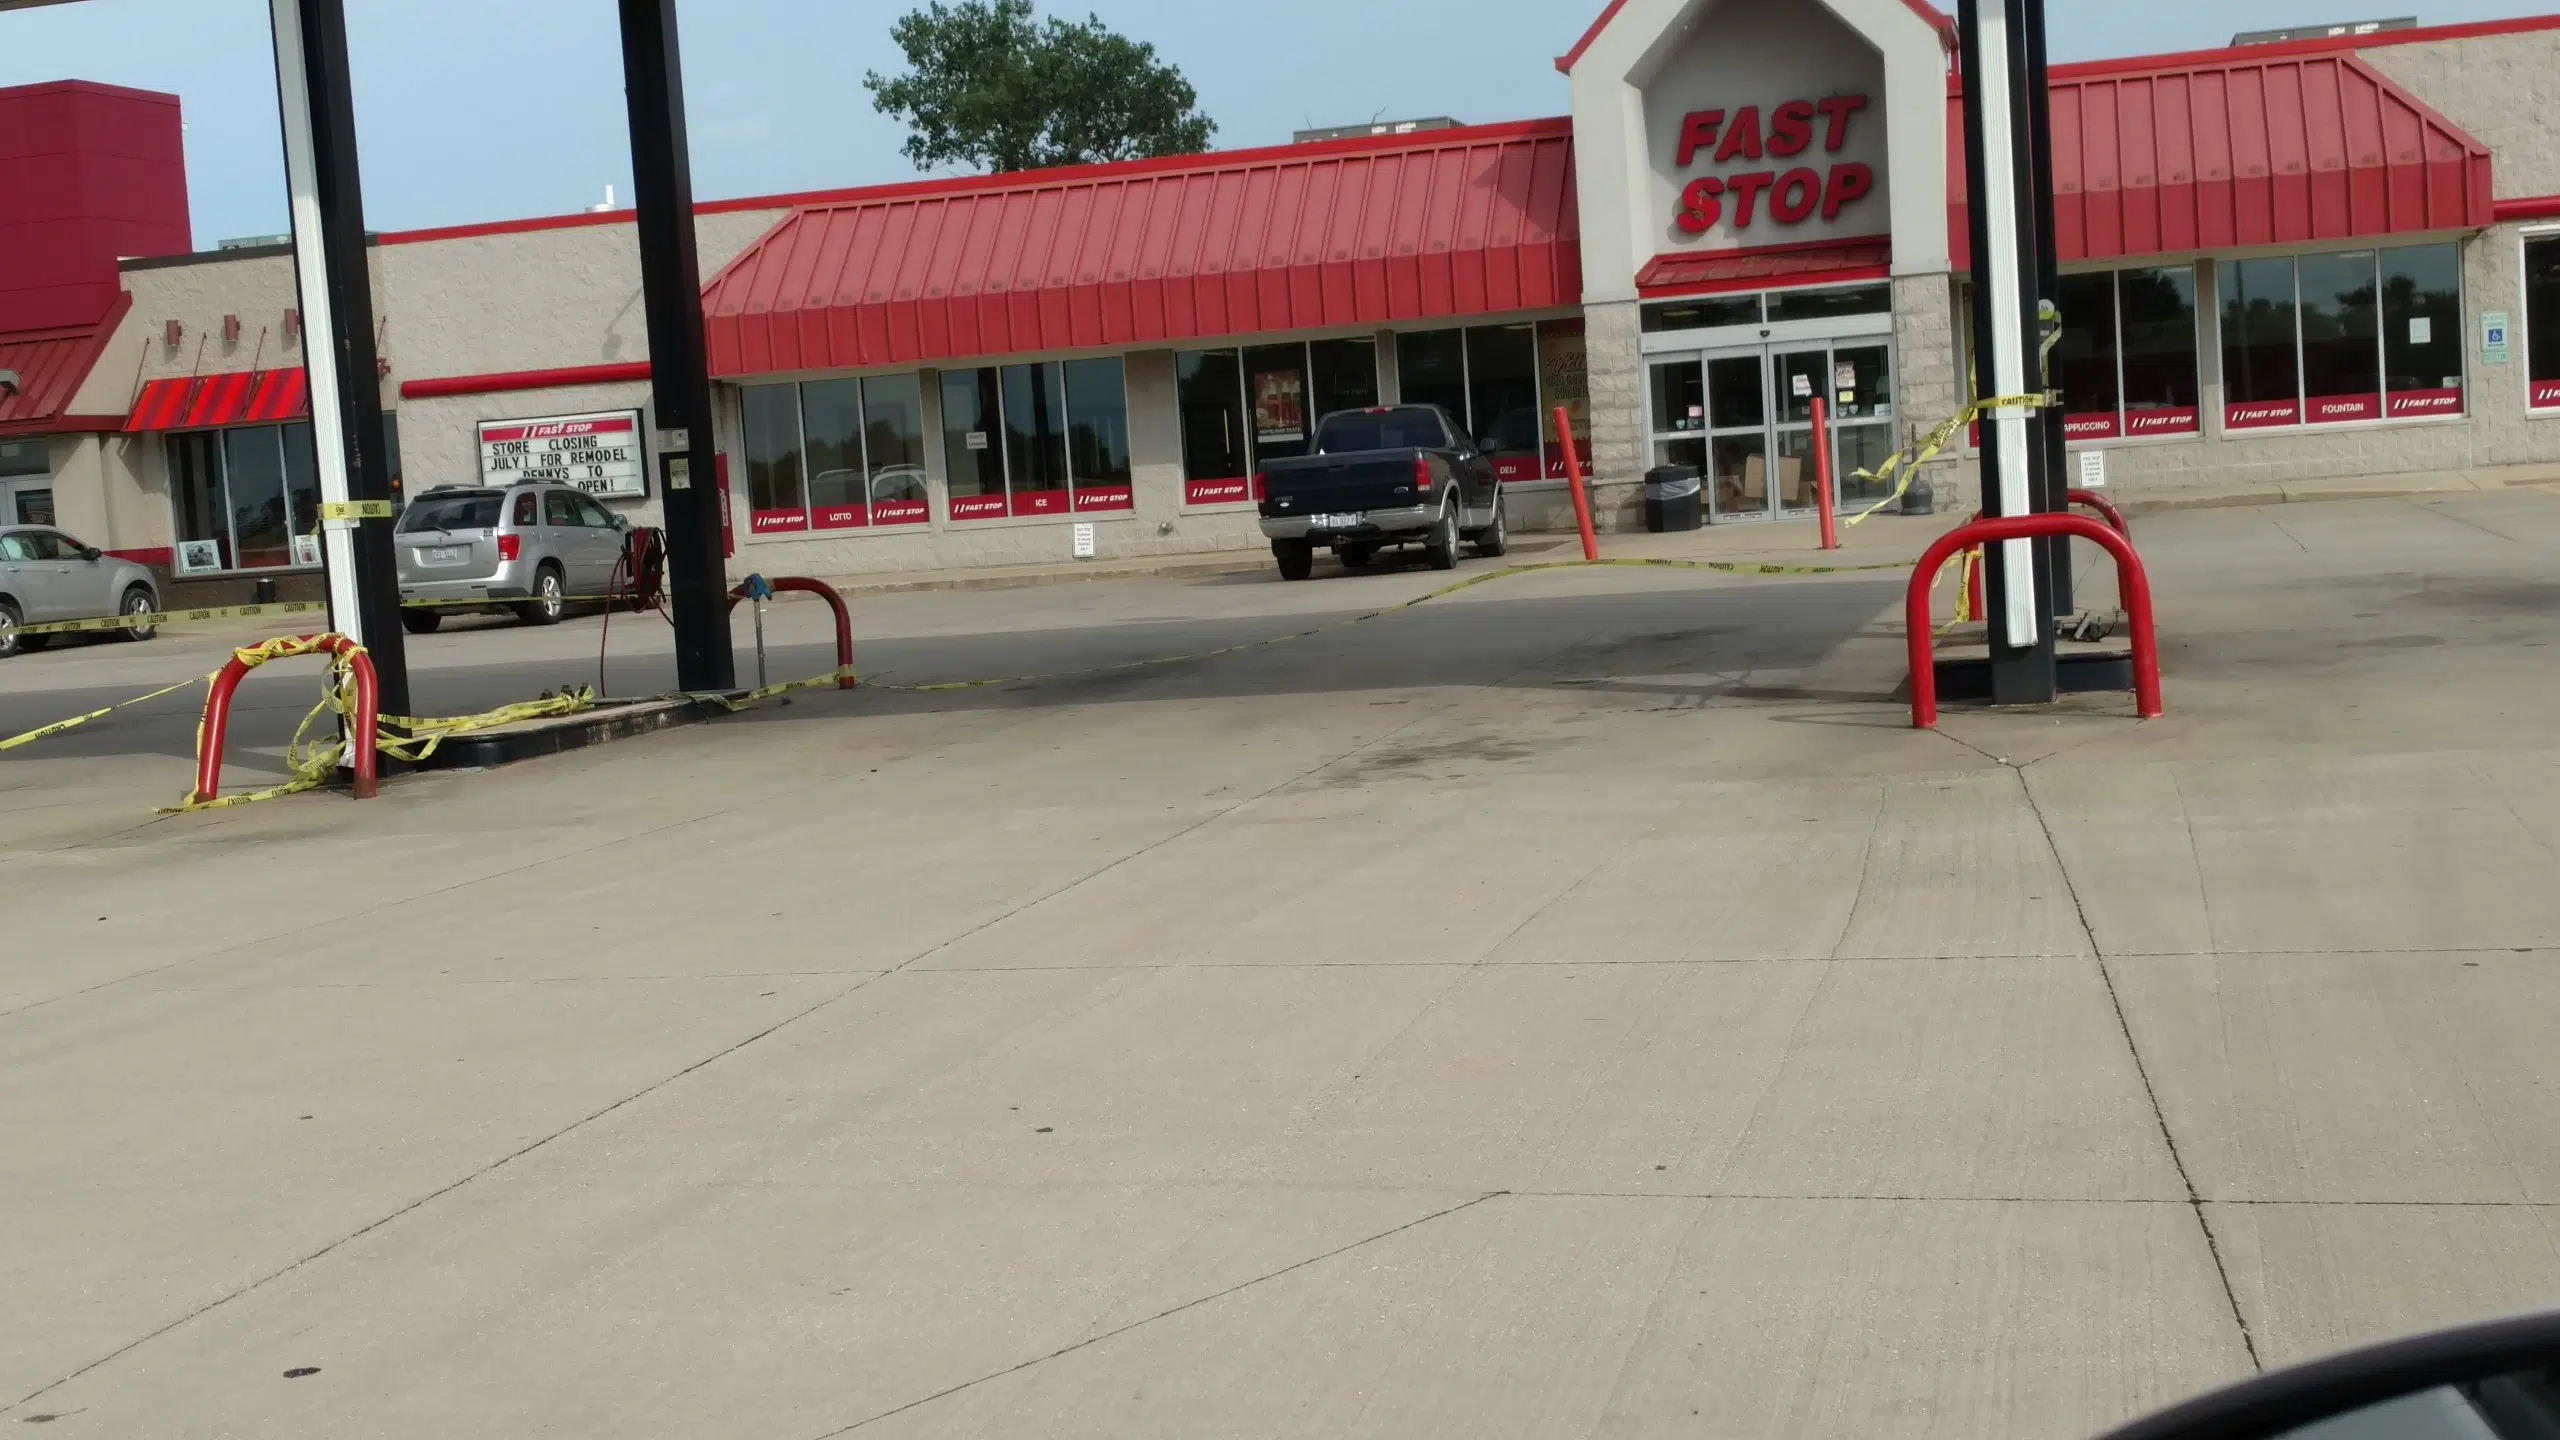 FS Travel Center in Vandalia currently closed, will re-open at a later time  as a Pilot Flying J Truck Stop | Vandalia Radio